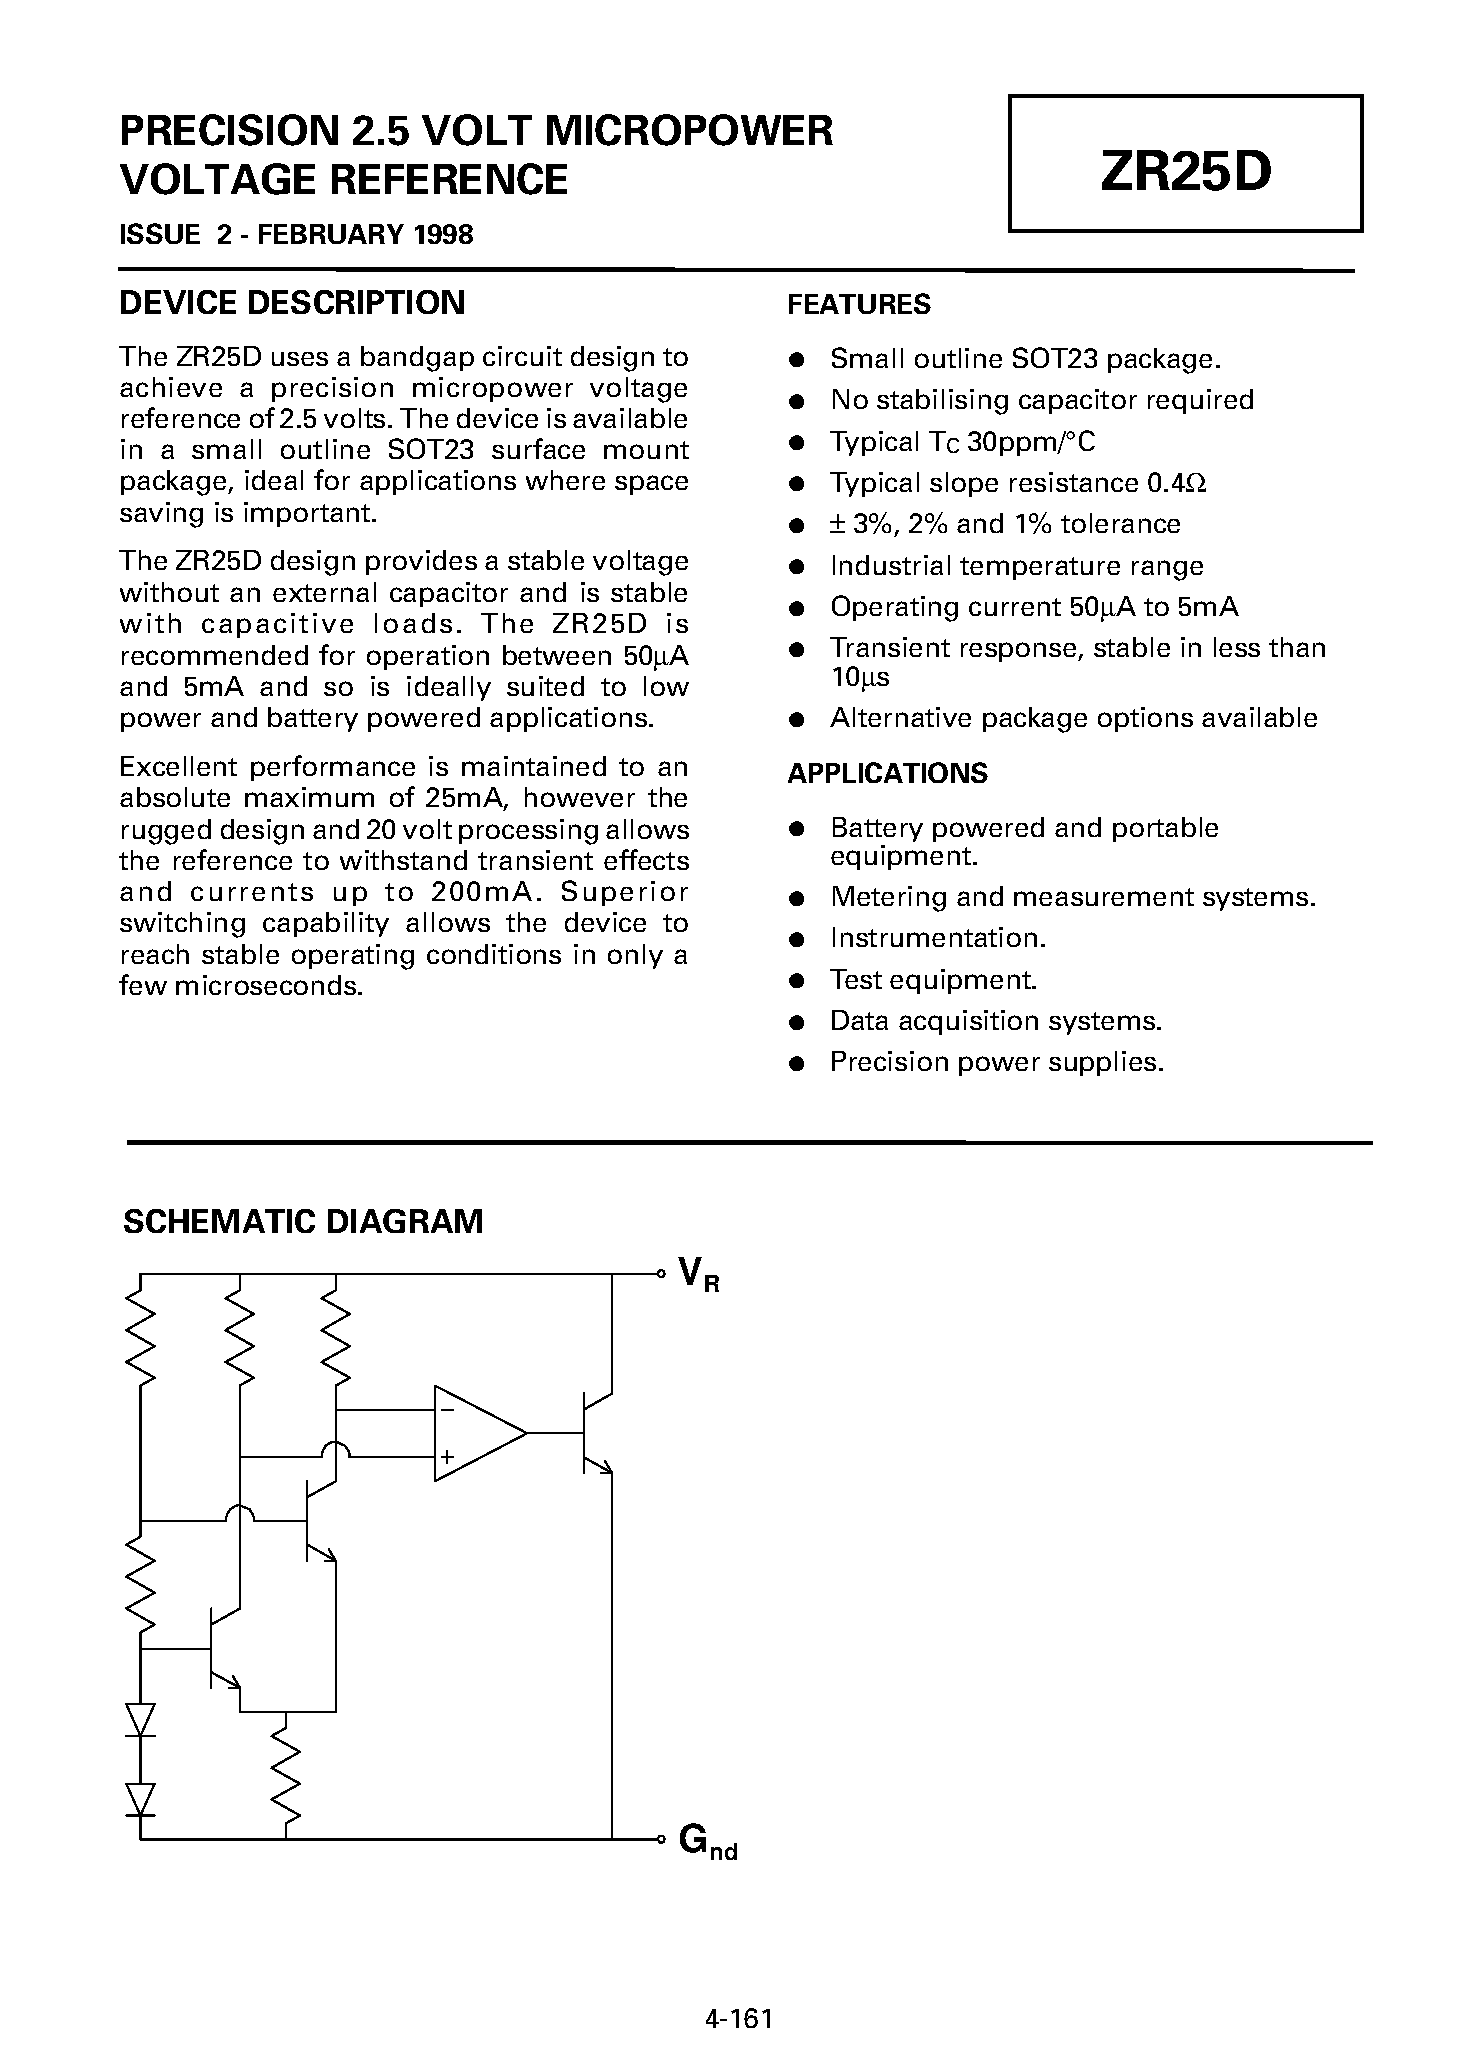 Datasheet ZR25D02 - PRECISION 2.5 VOLT MICROPOWER VOLTAGE REFERENCE page 1